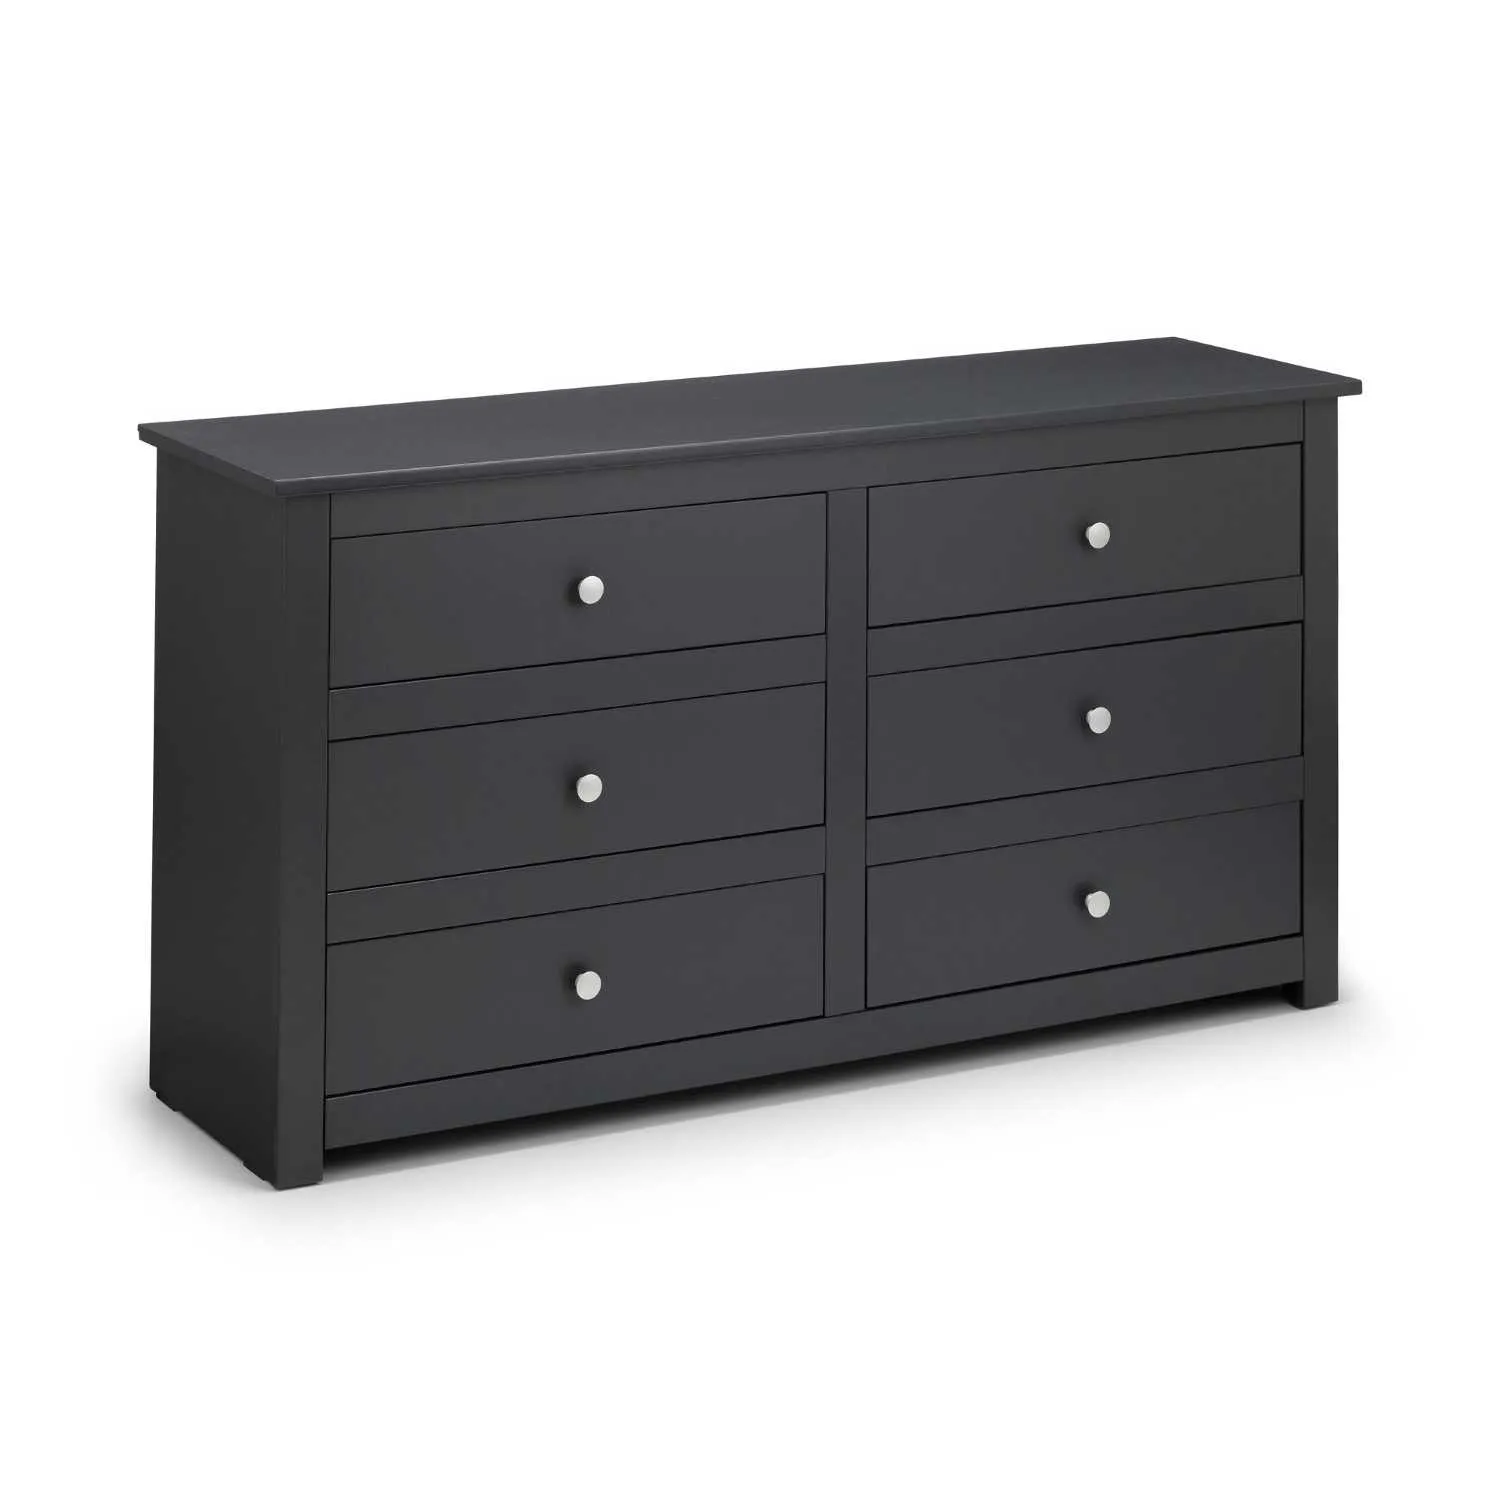 Chest of 6 Drawers Anthracite Grey Painted Modern Bedroom Furniture